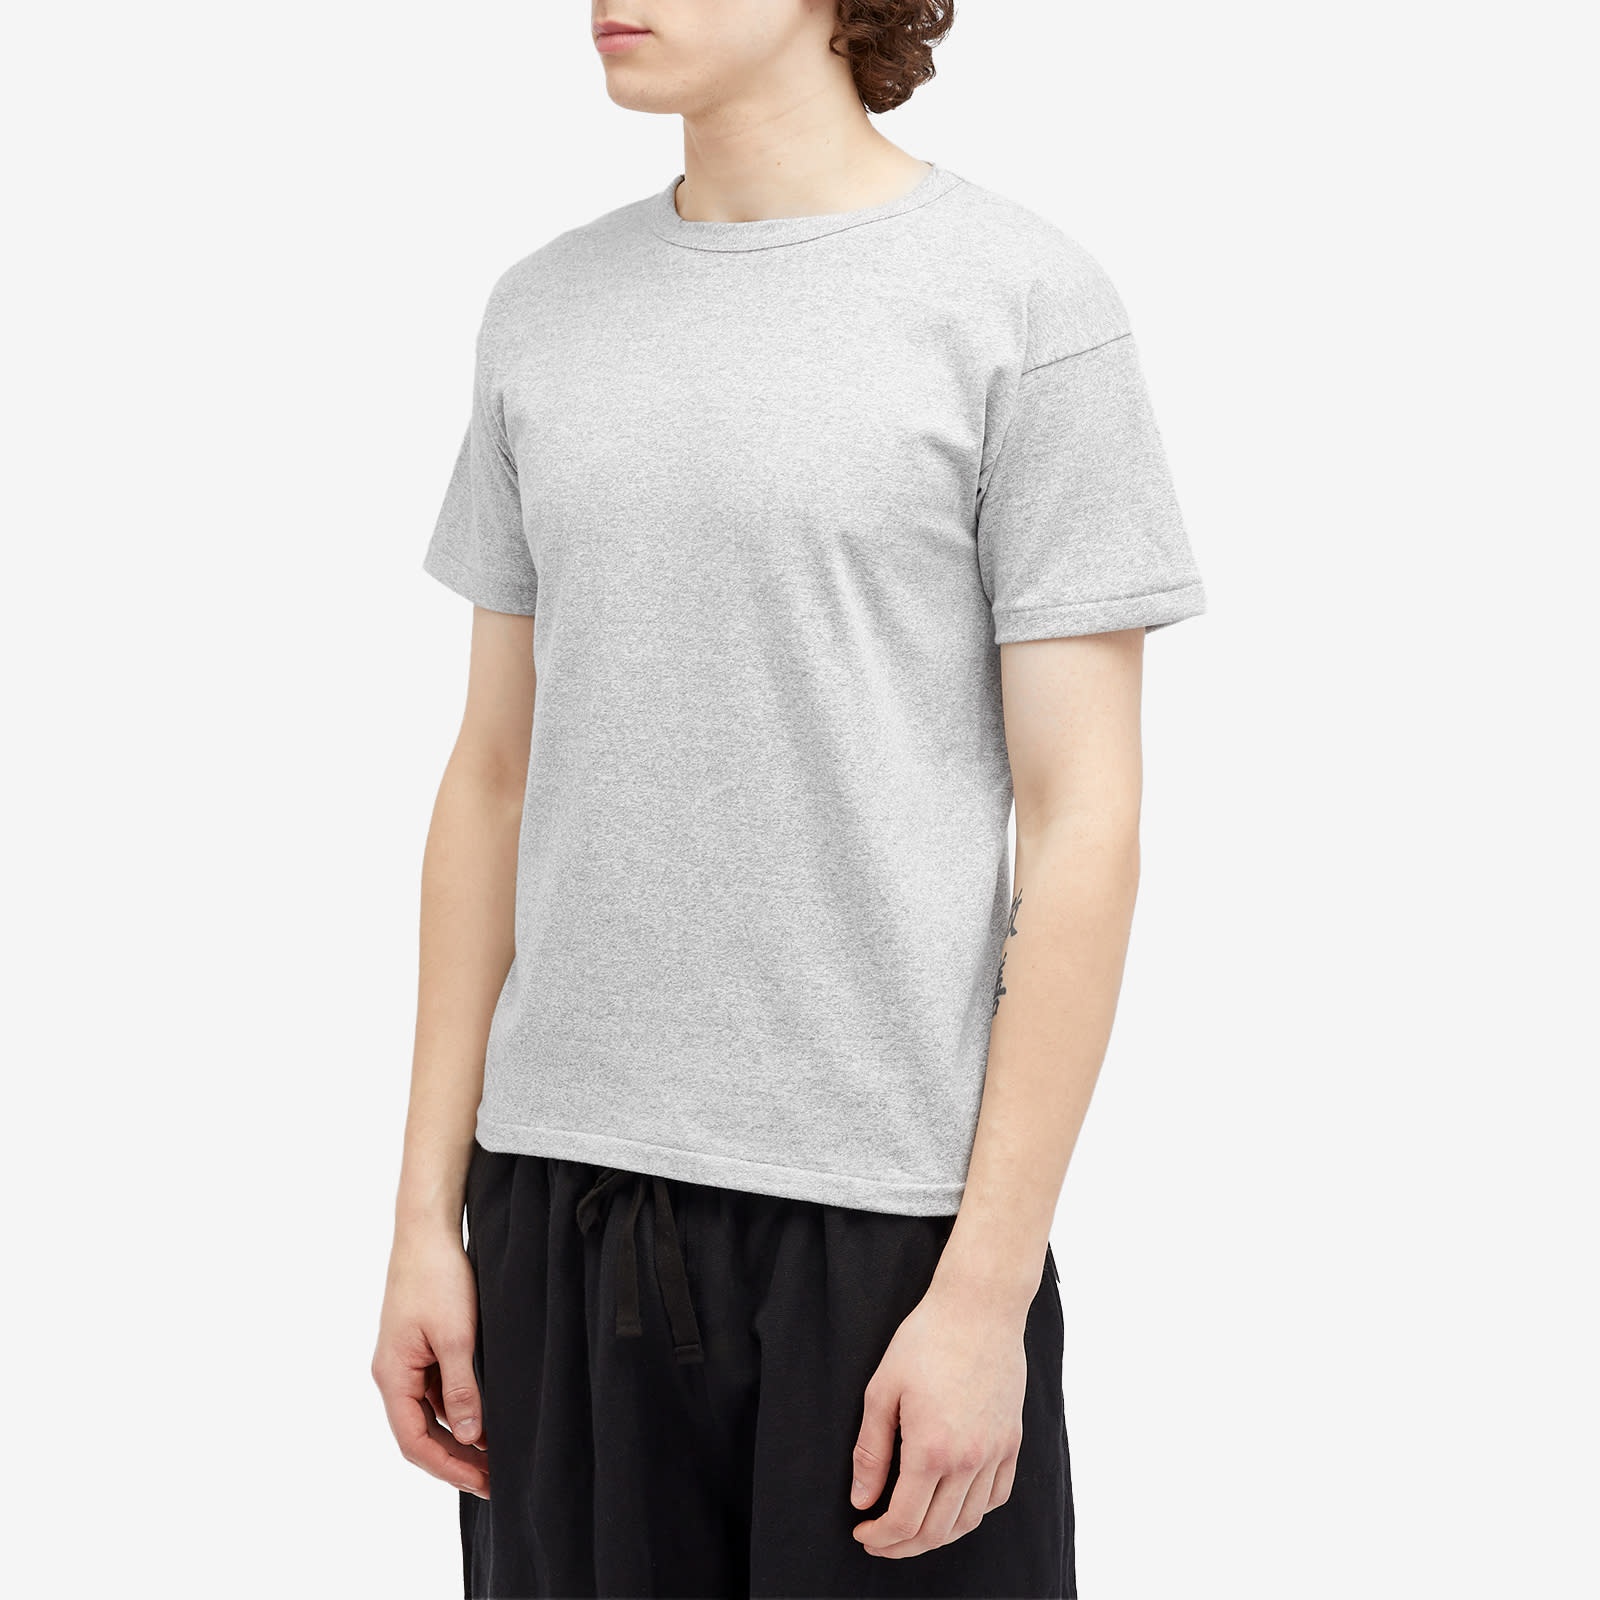 Champion Made in Japan T-Shirt - 2